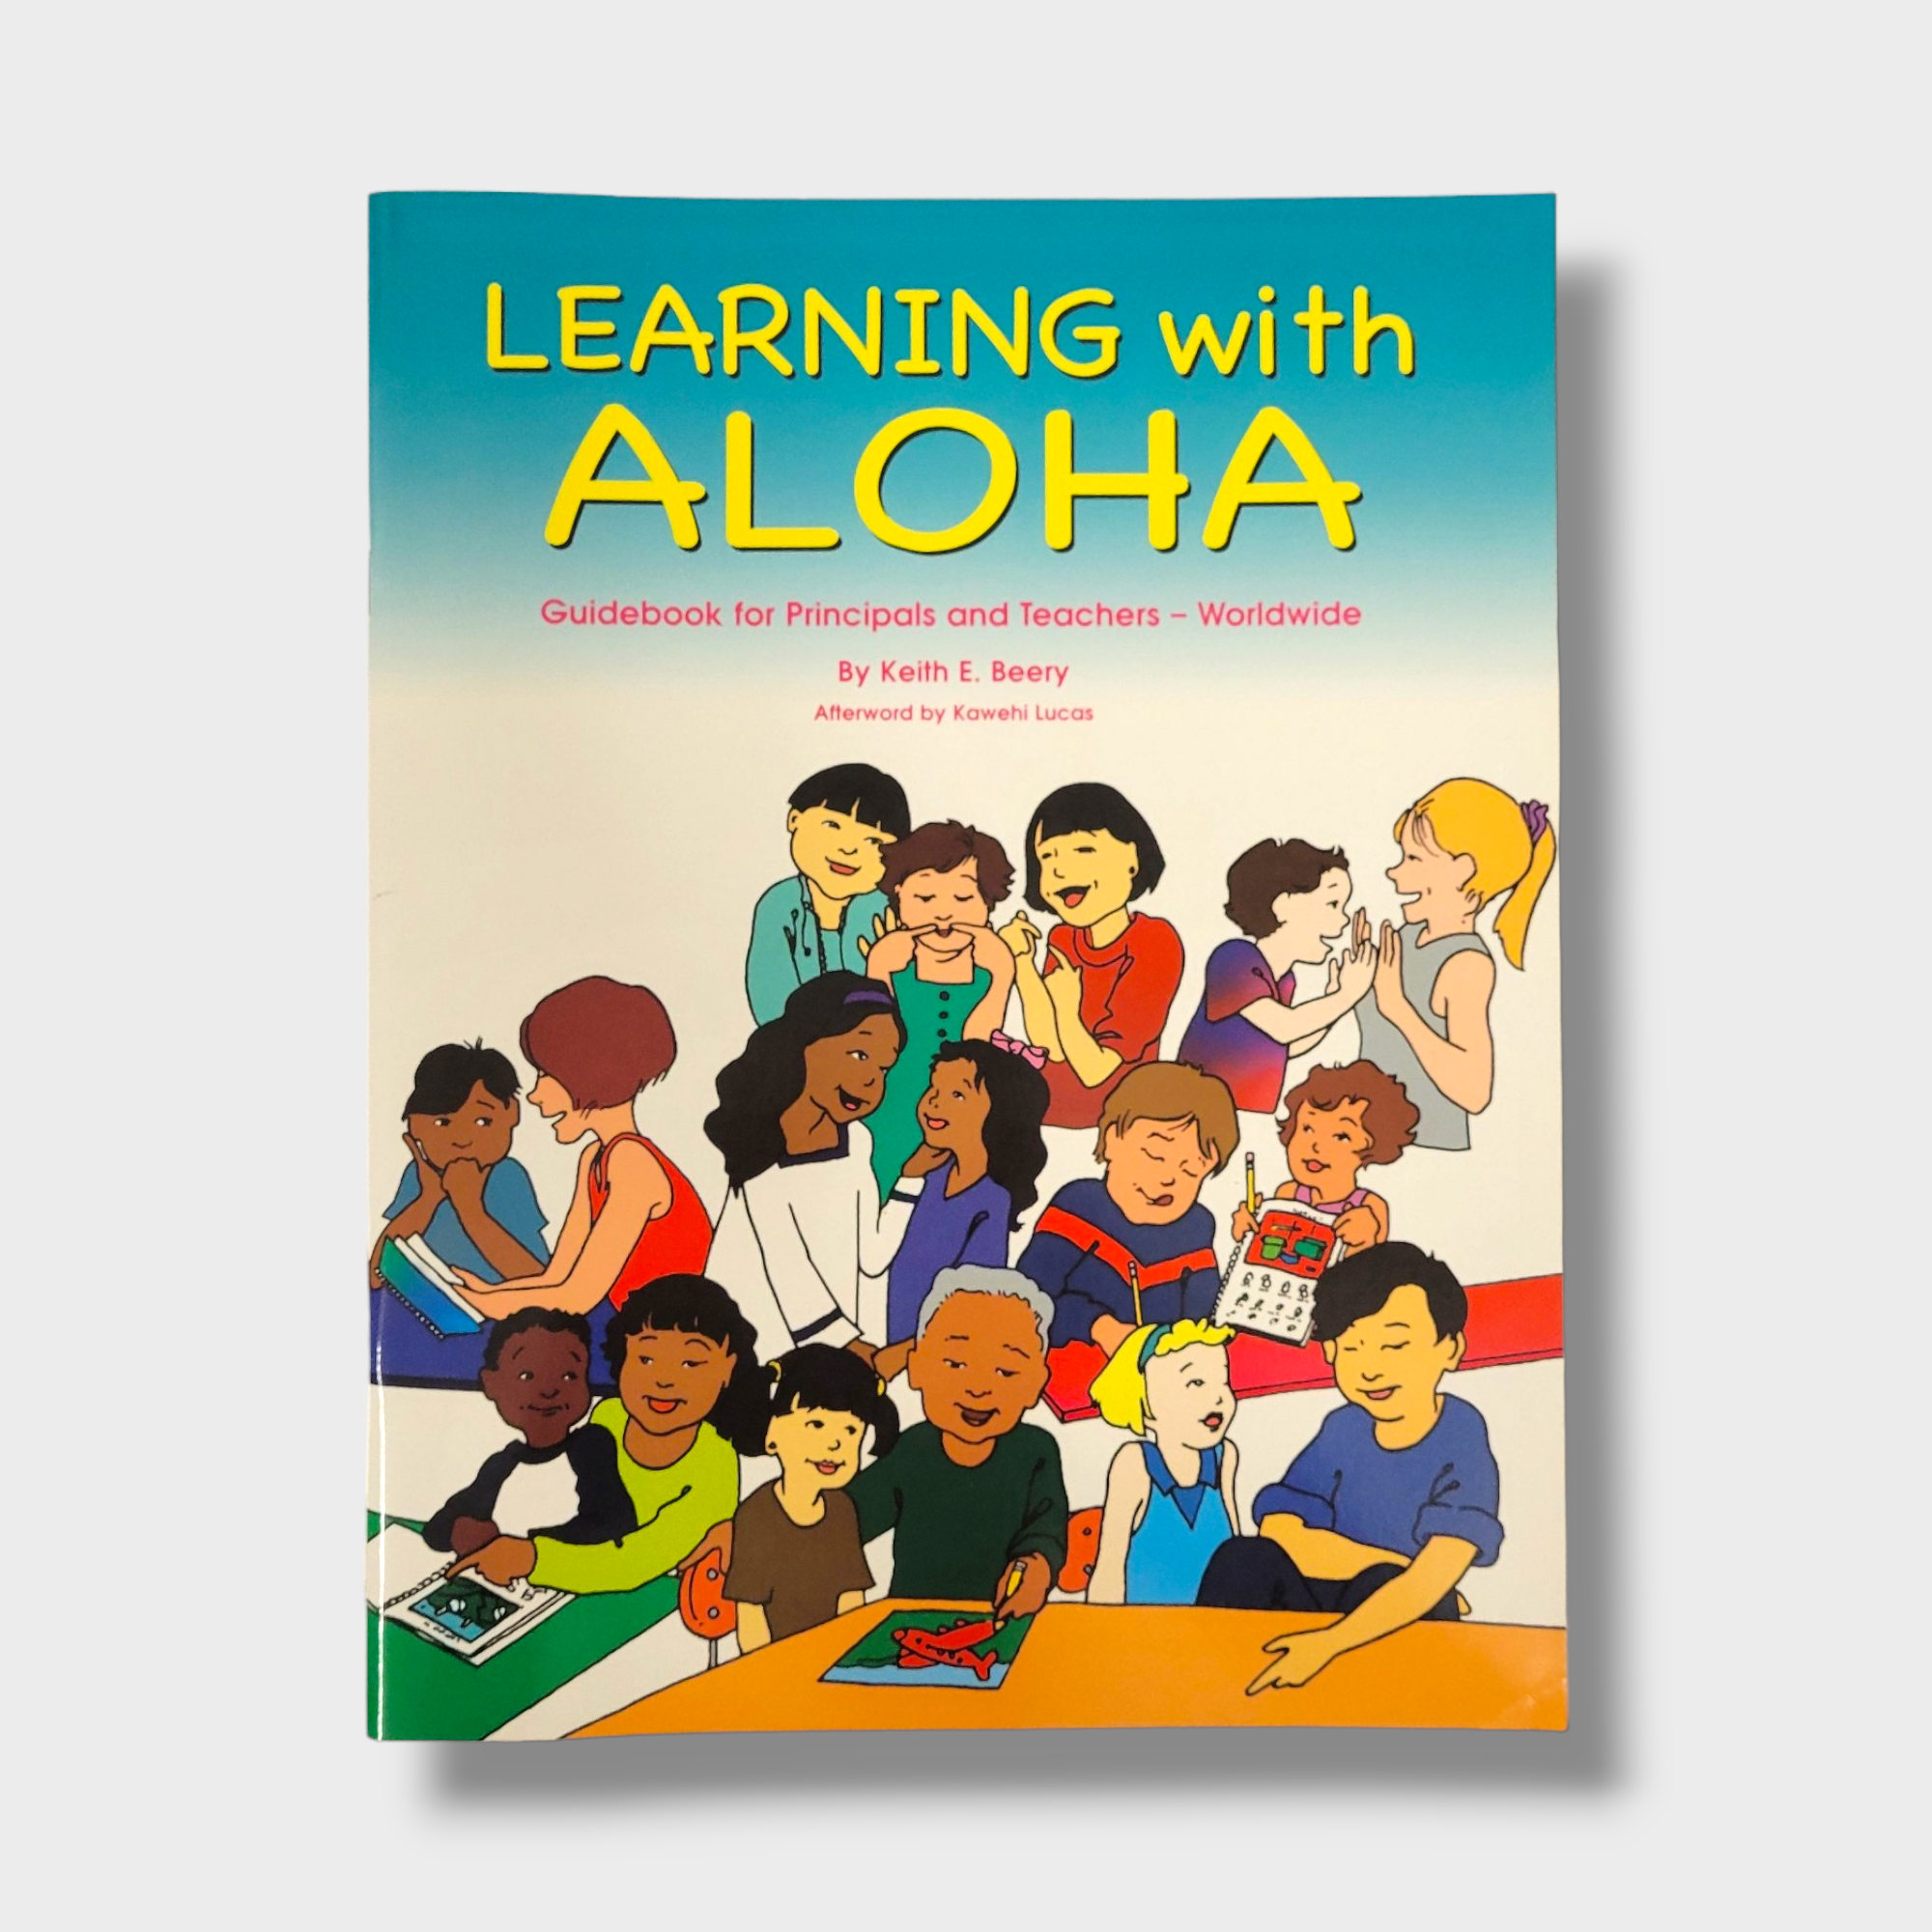 Learning with Aloha: Guidebook for Principals and Teachers – Worldwide